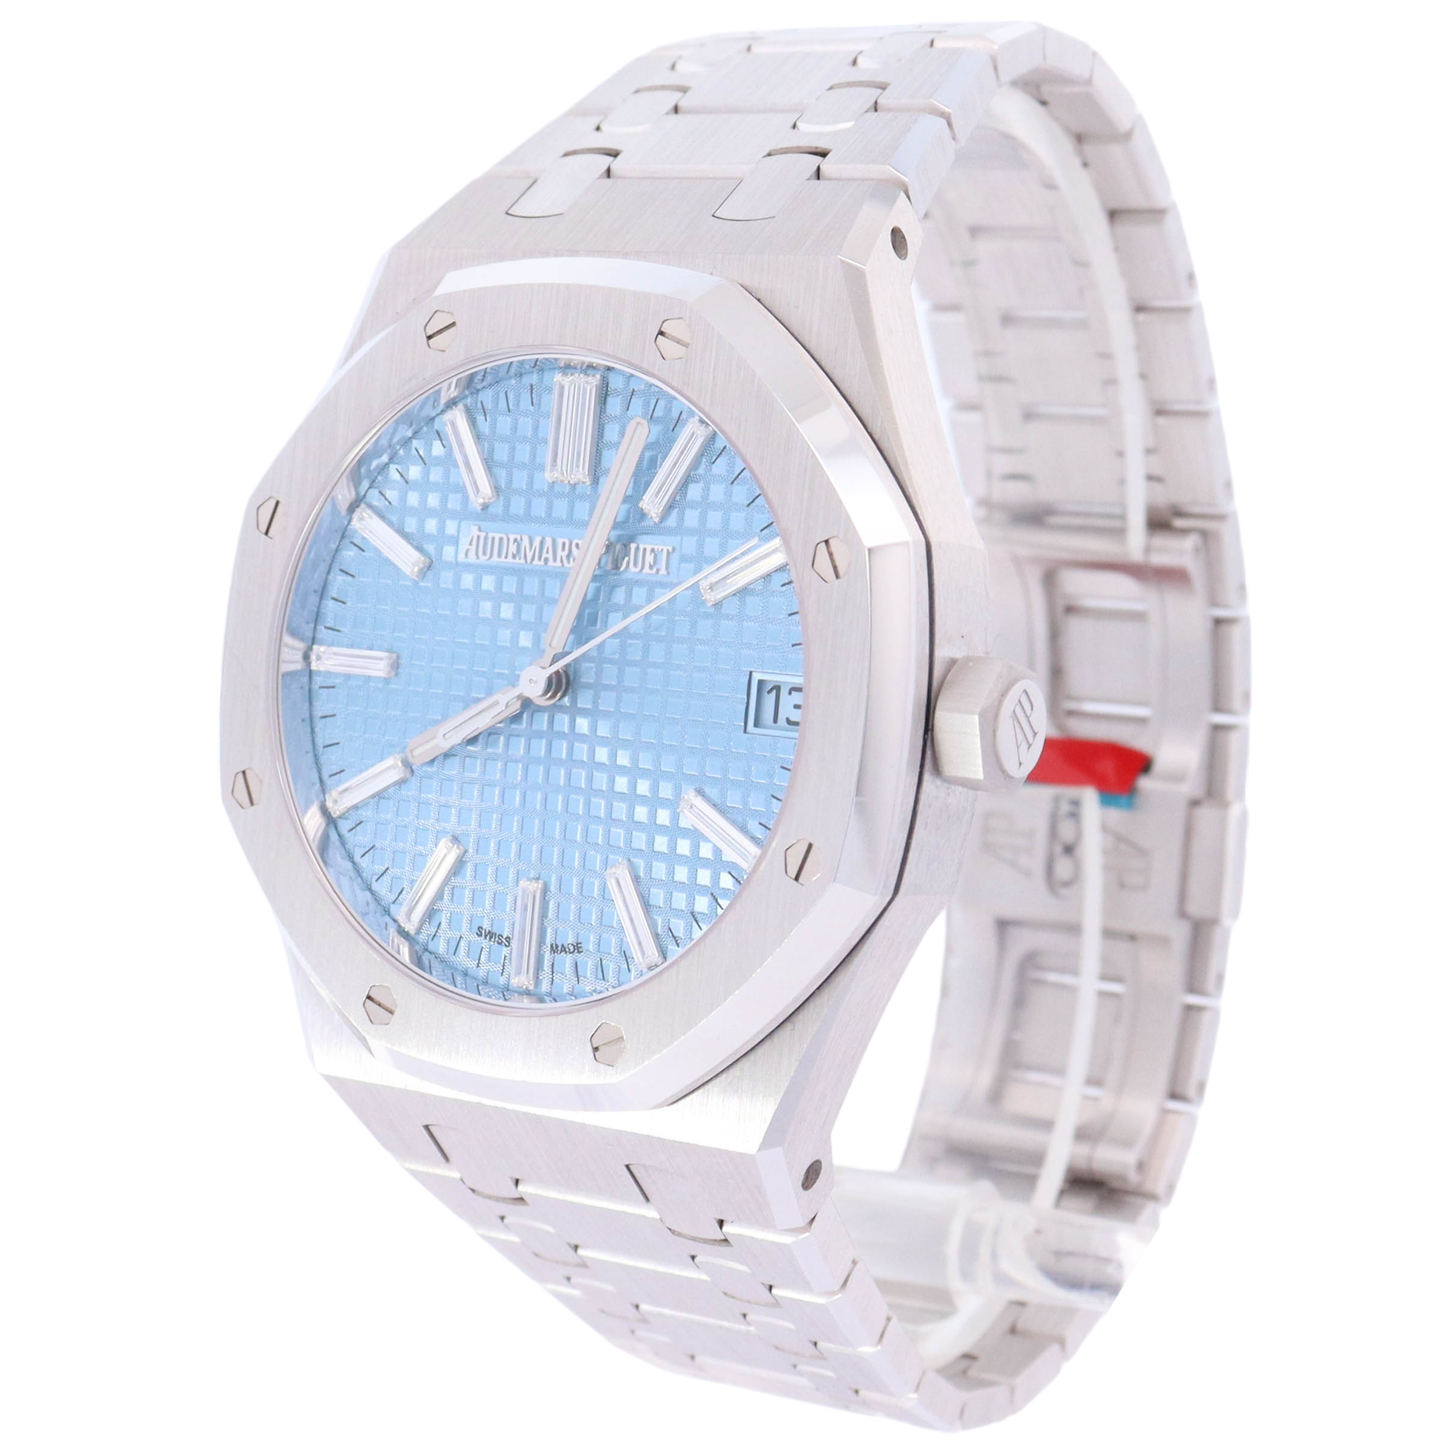 Audemars Piguet Royal Oak 41mm White Gold Light Blue Baguette Dial Watch Reference# 15510BC.OO.1320BC.01 - Happy Jewelers Fine Jewelry Lifetime Warranty